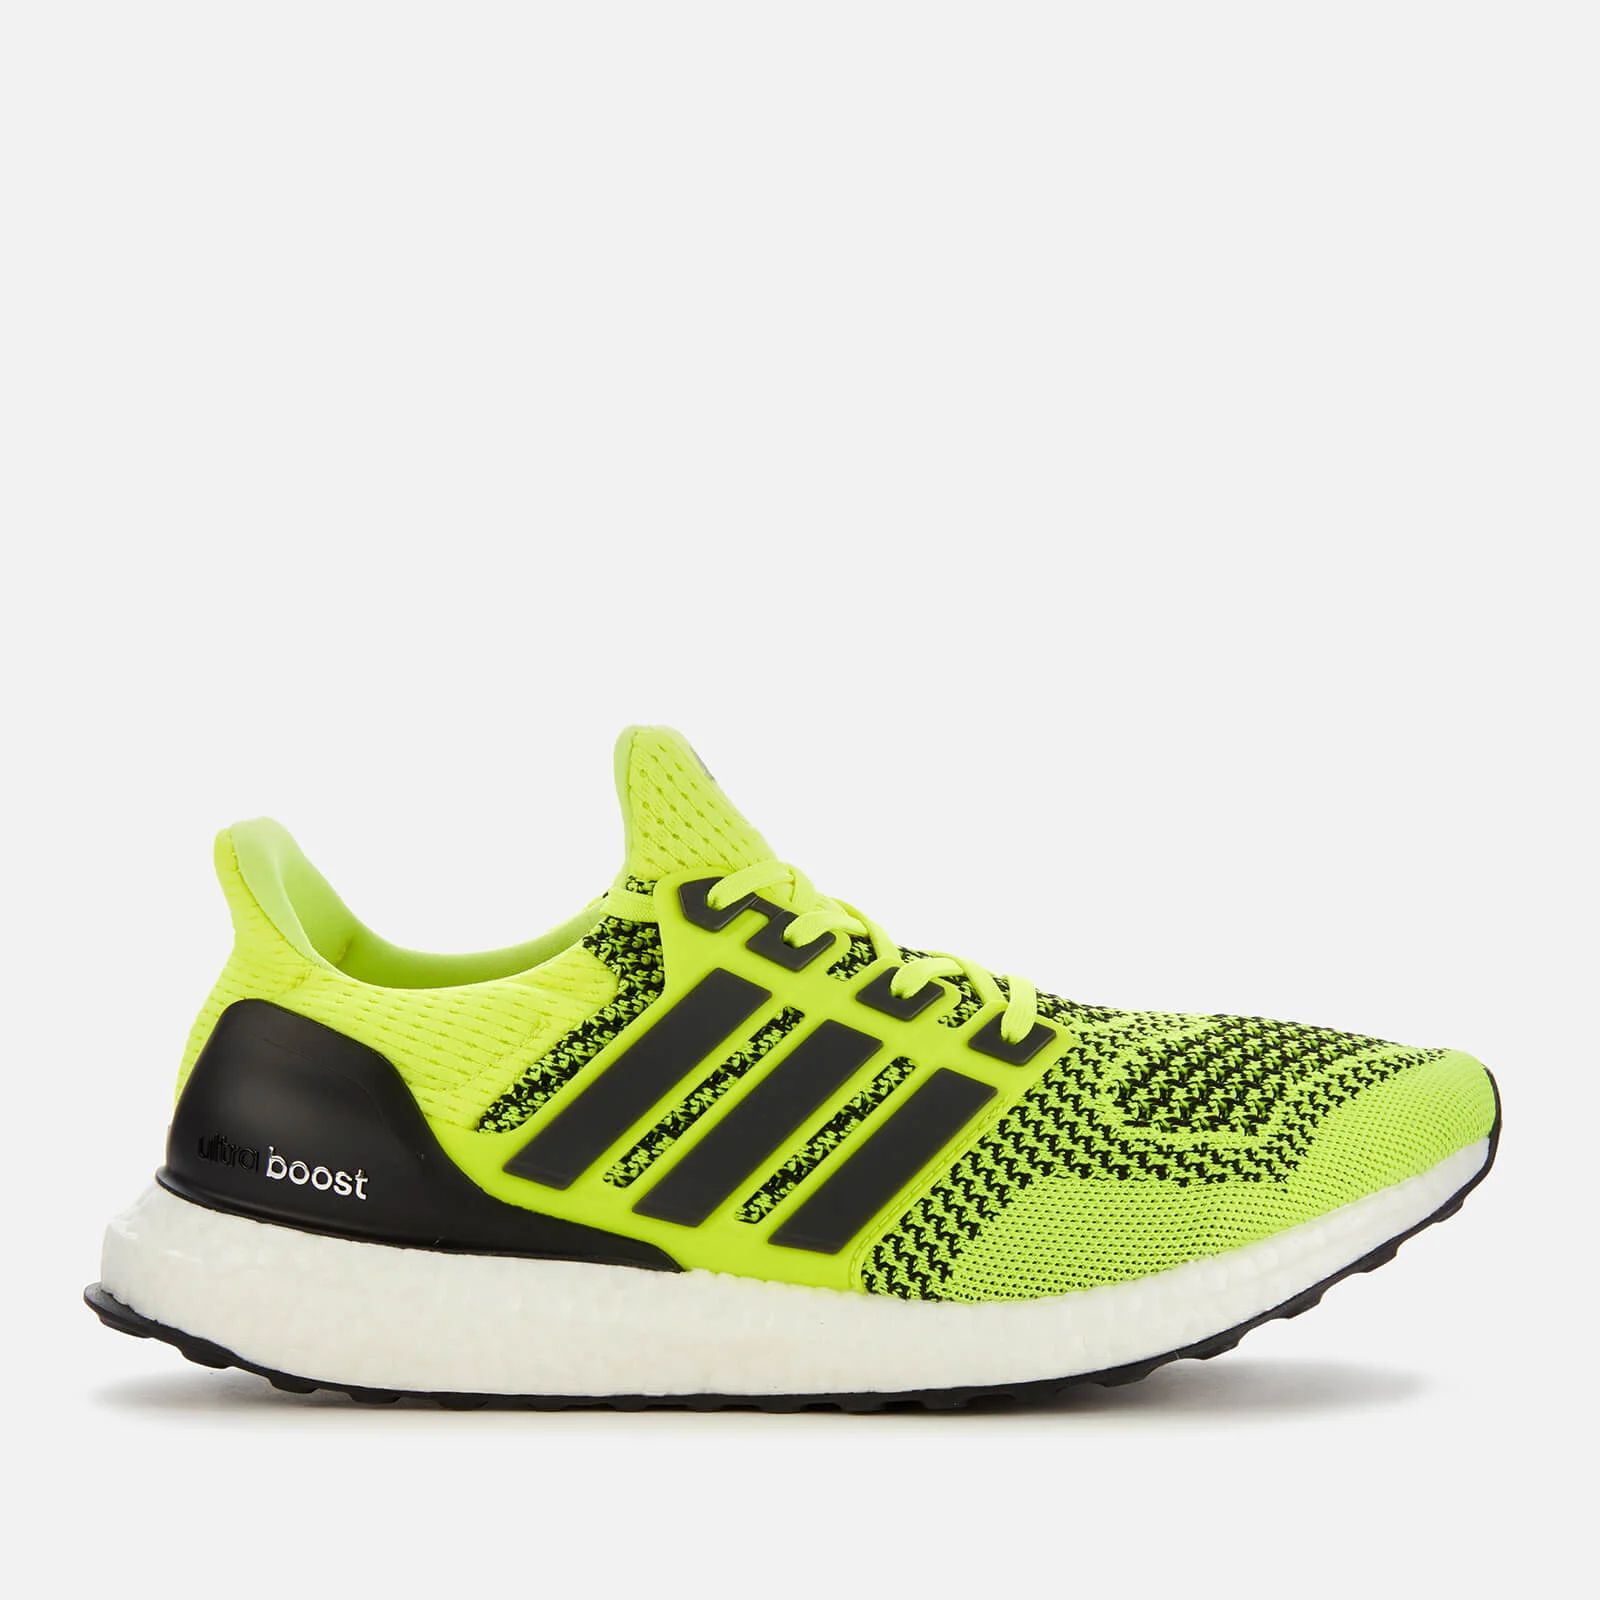 adidas Men's Ultra Boost Running Shoes - Solar Yellow Image 1